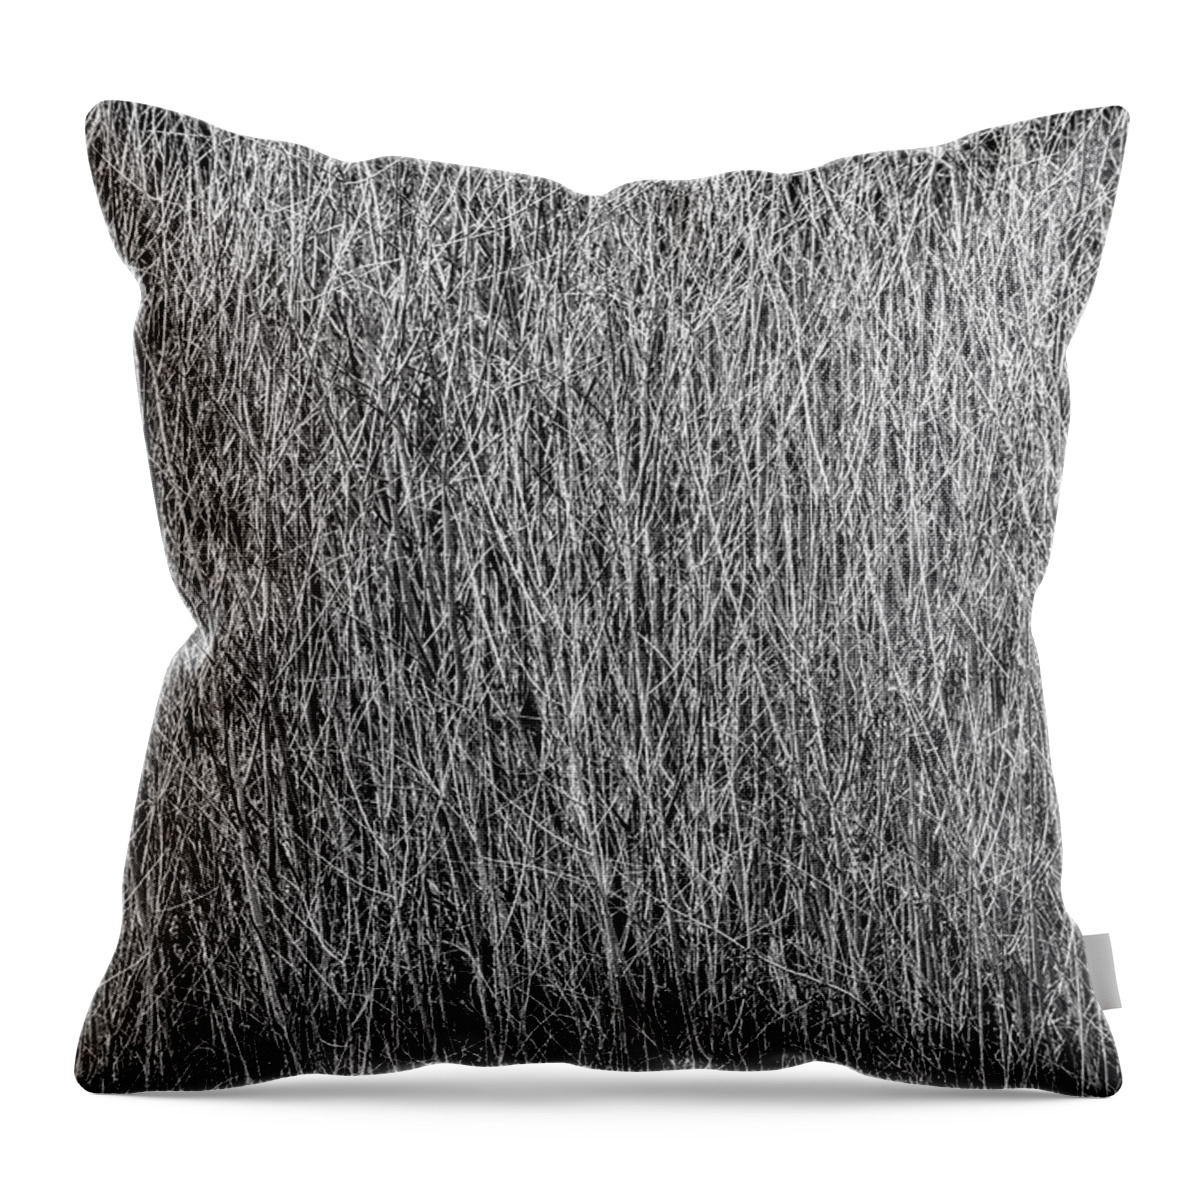 Willows Throw Pillow featuring the photograph Winter Willows by Michael Brungardt